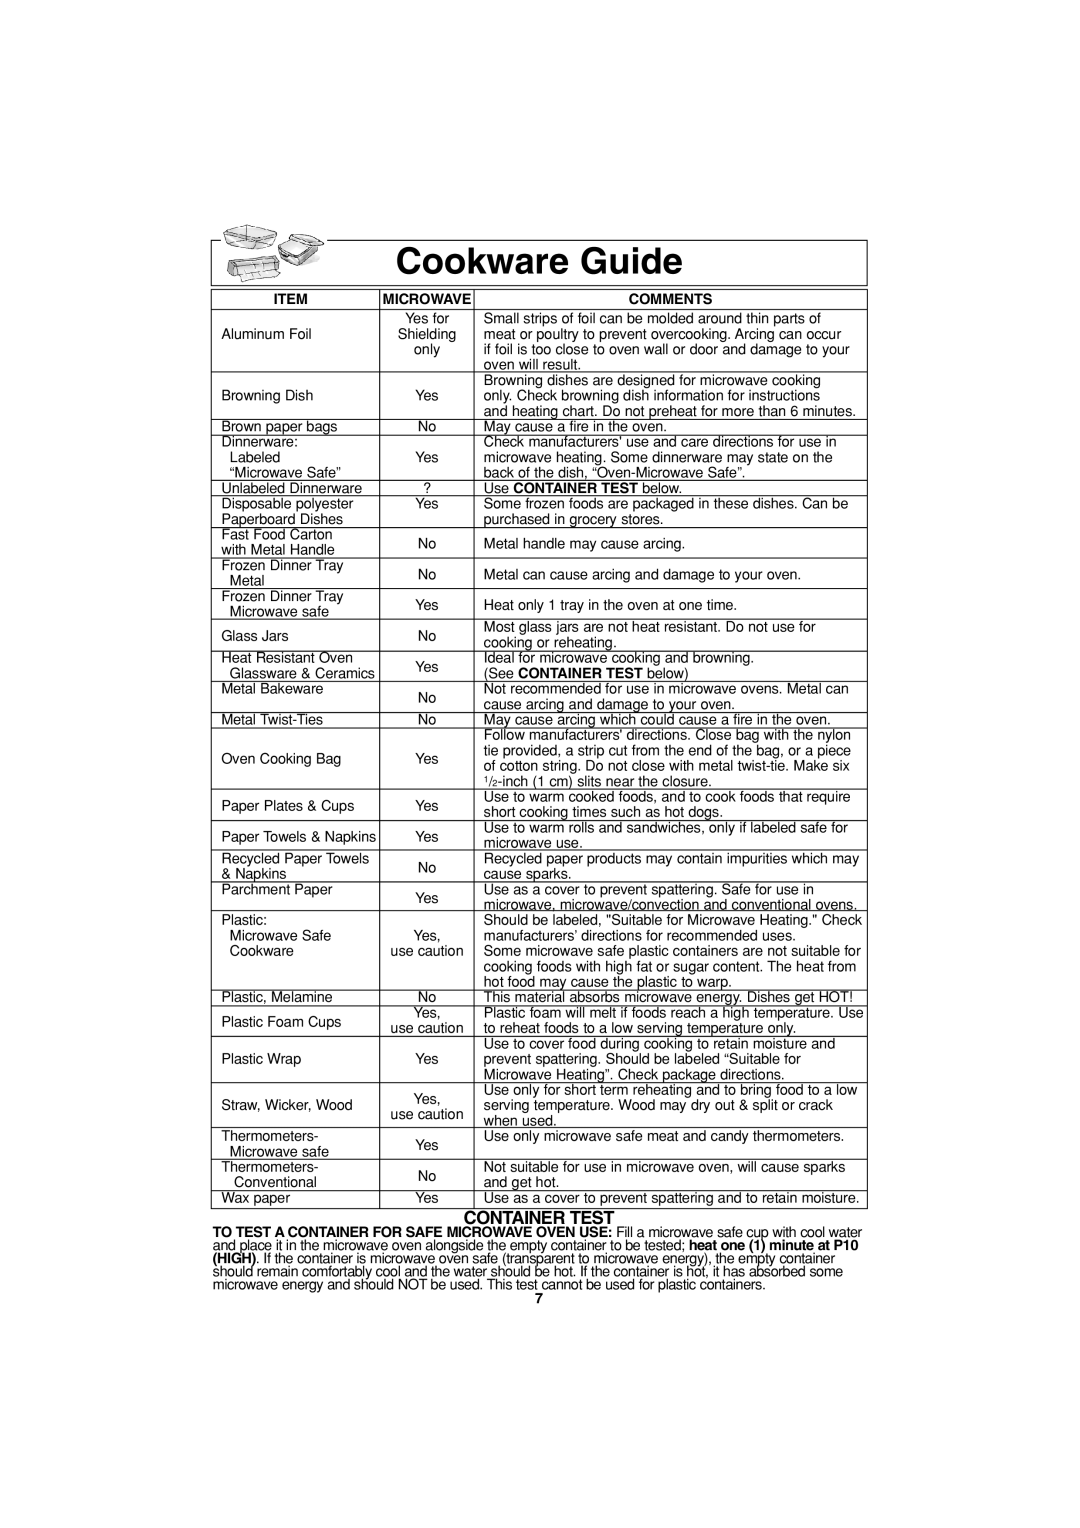 Panasonic NN-S423 important safety instructions Cookware Guide, Container Test 